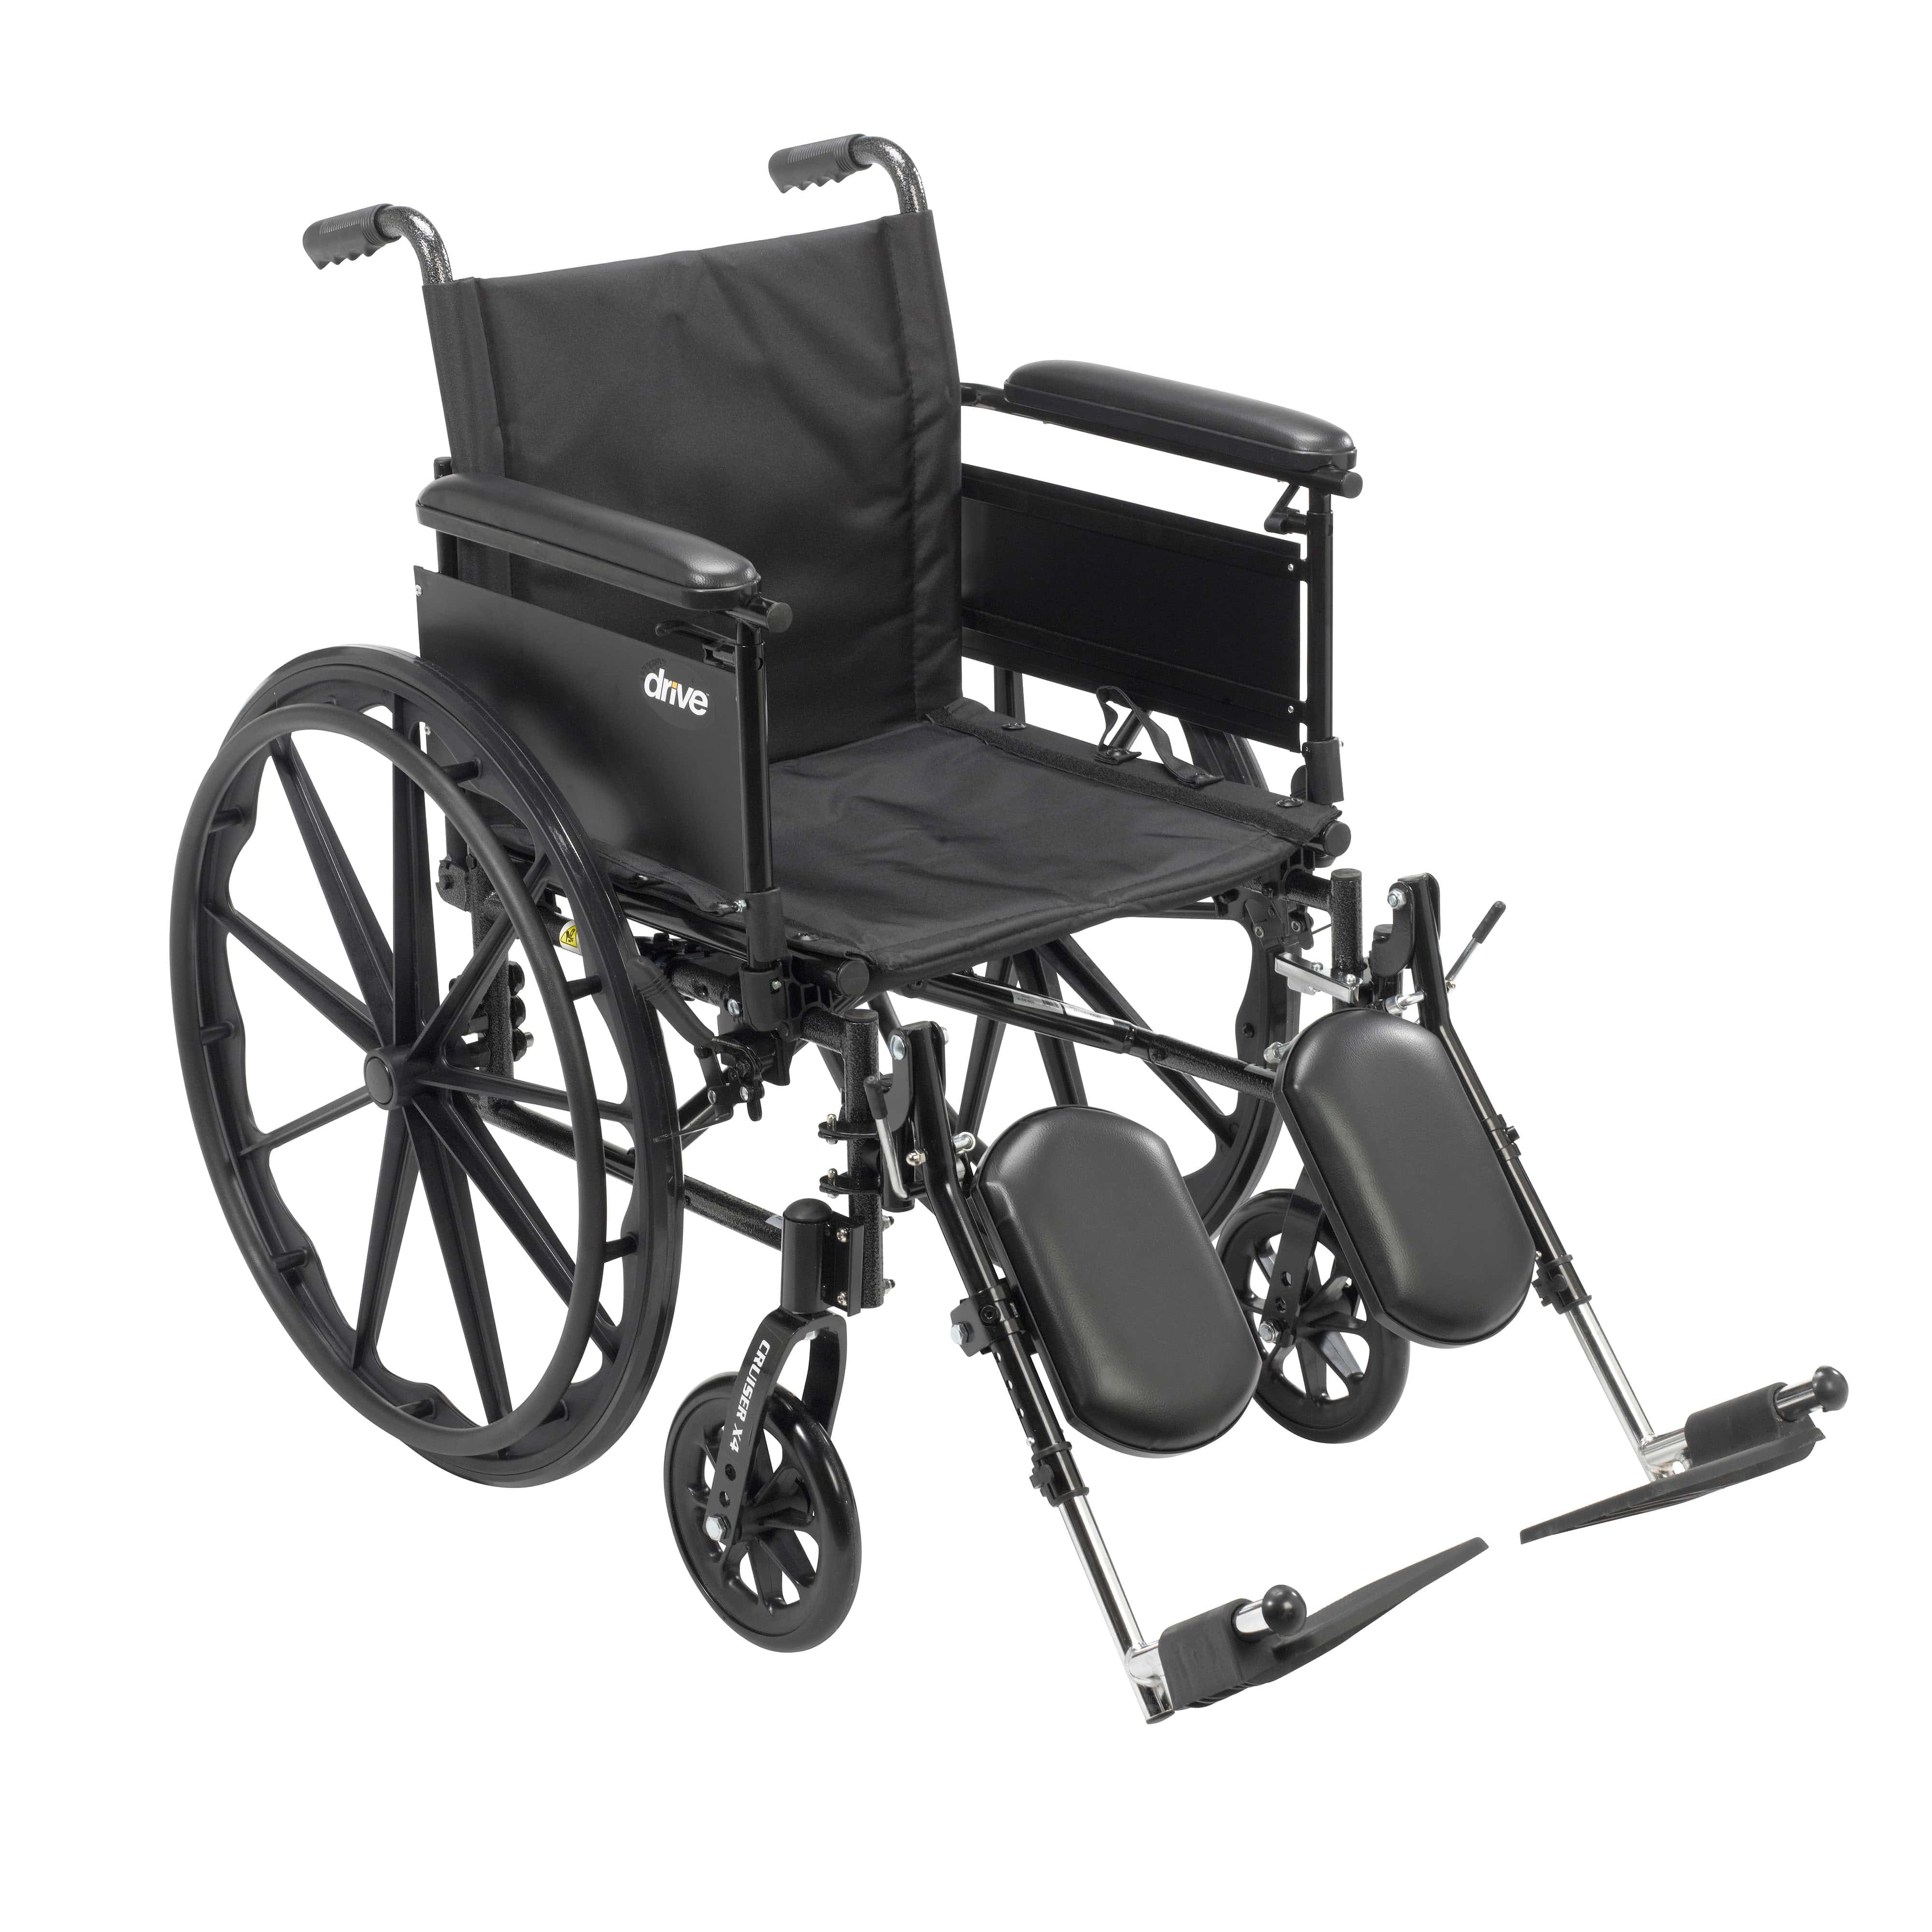 Drive Medical Drive Medical Cruiser X4 Lightweight Dual Axle Wheelchair with Adjustable Detatchable Arms CX418ADFA-ELR